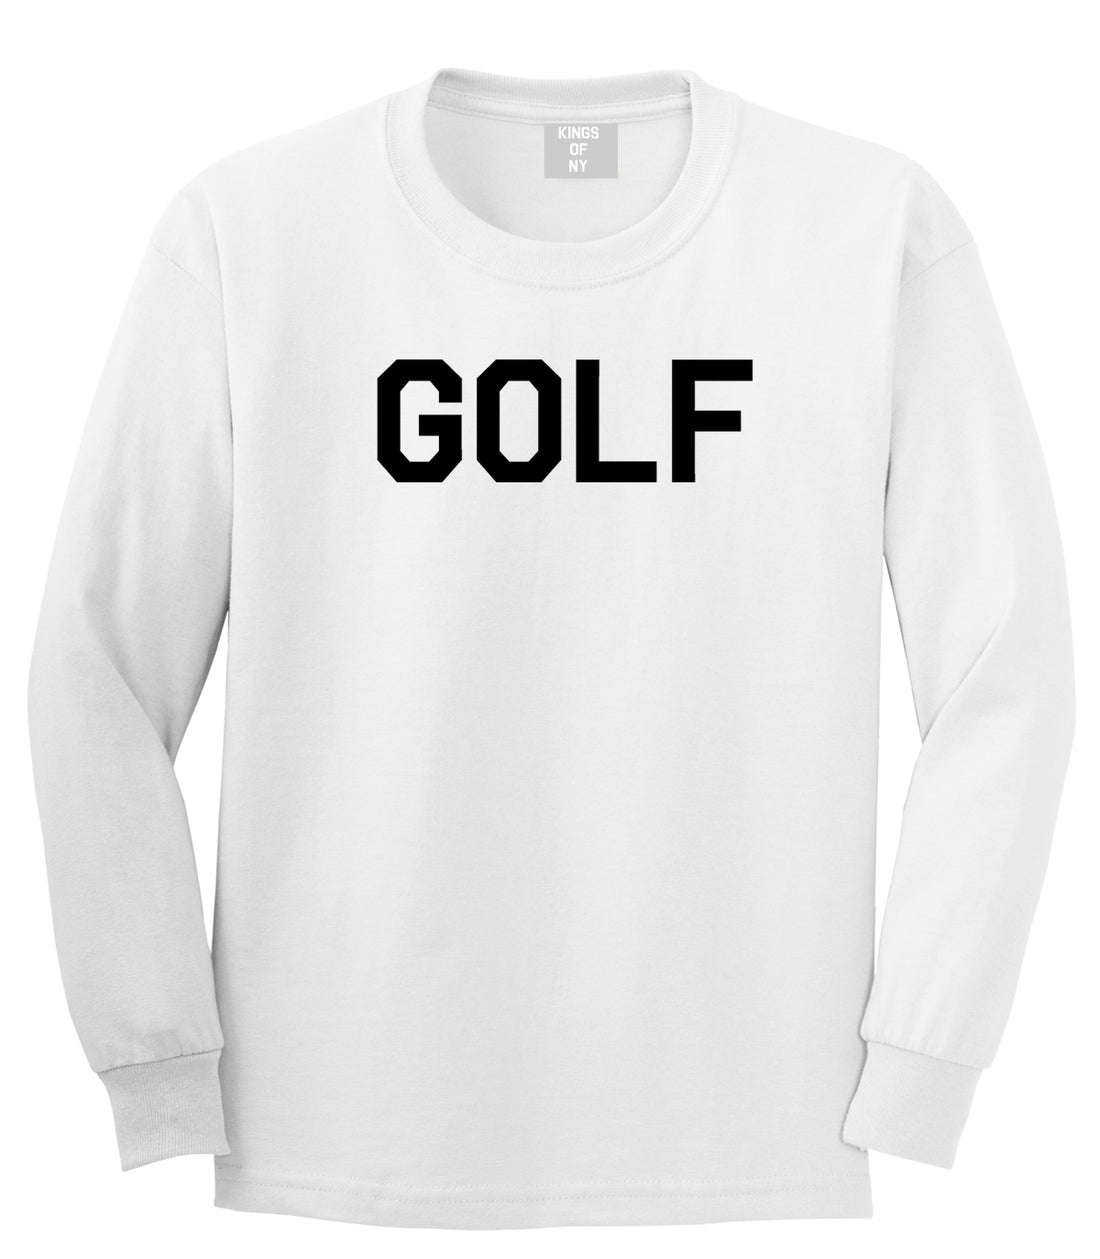 Golf Sport Mens White Long Sleeve T-Shirt by KINGS OF NY